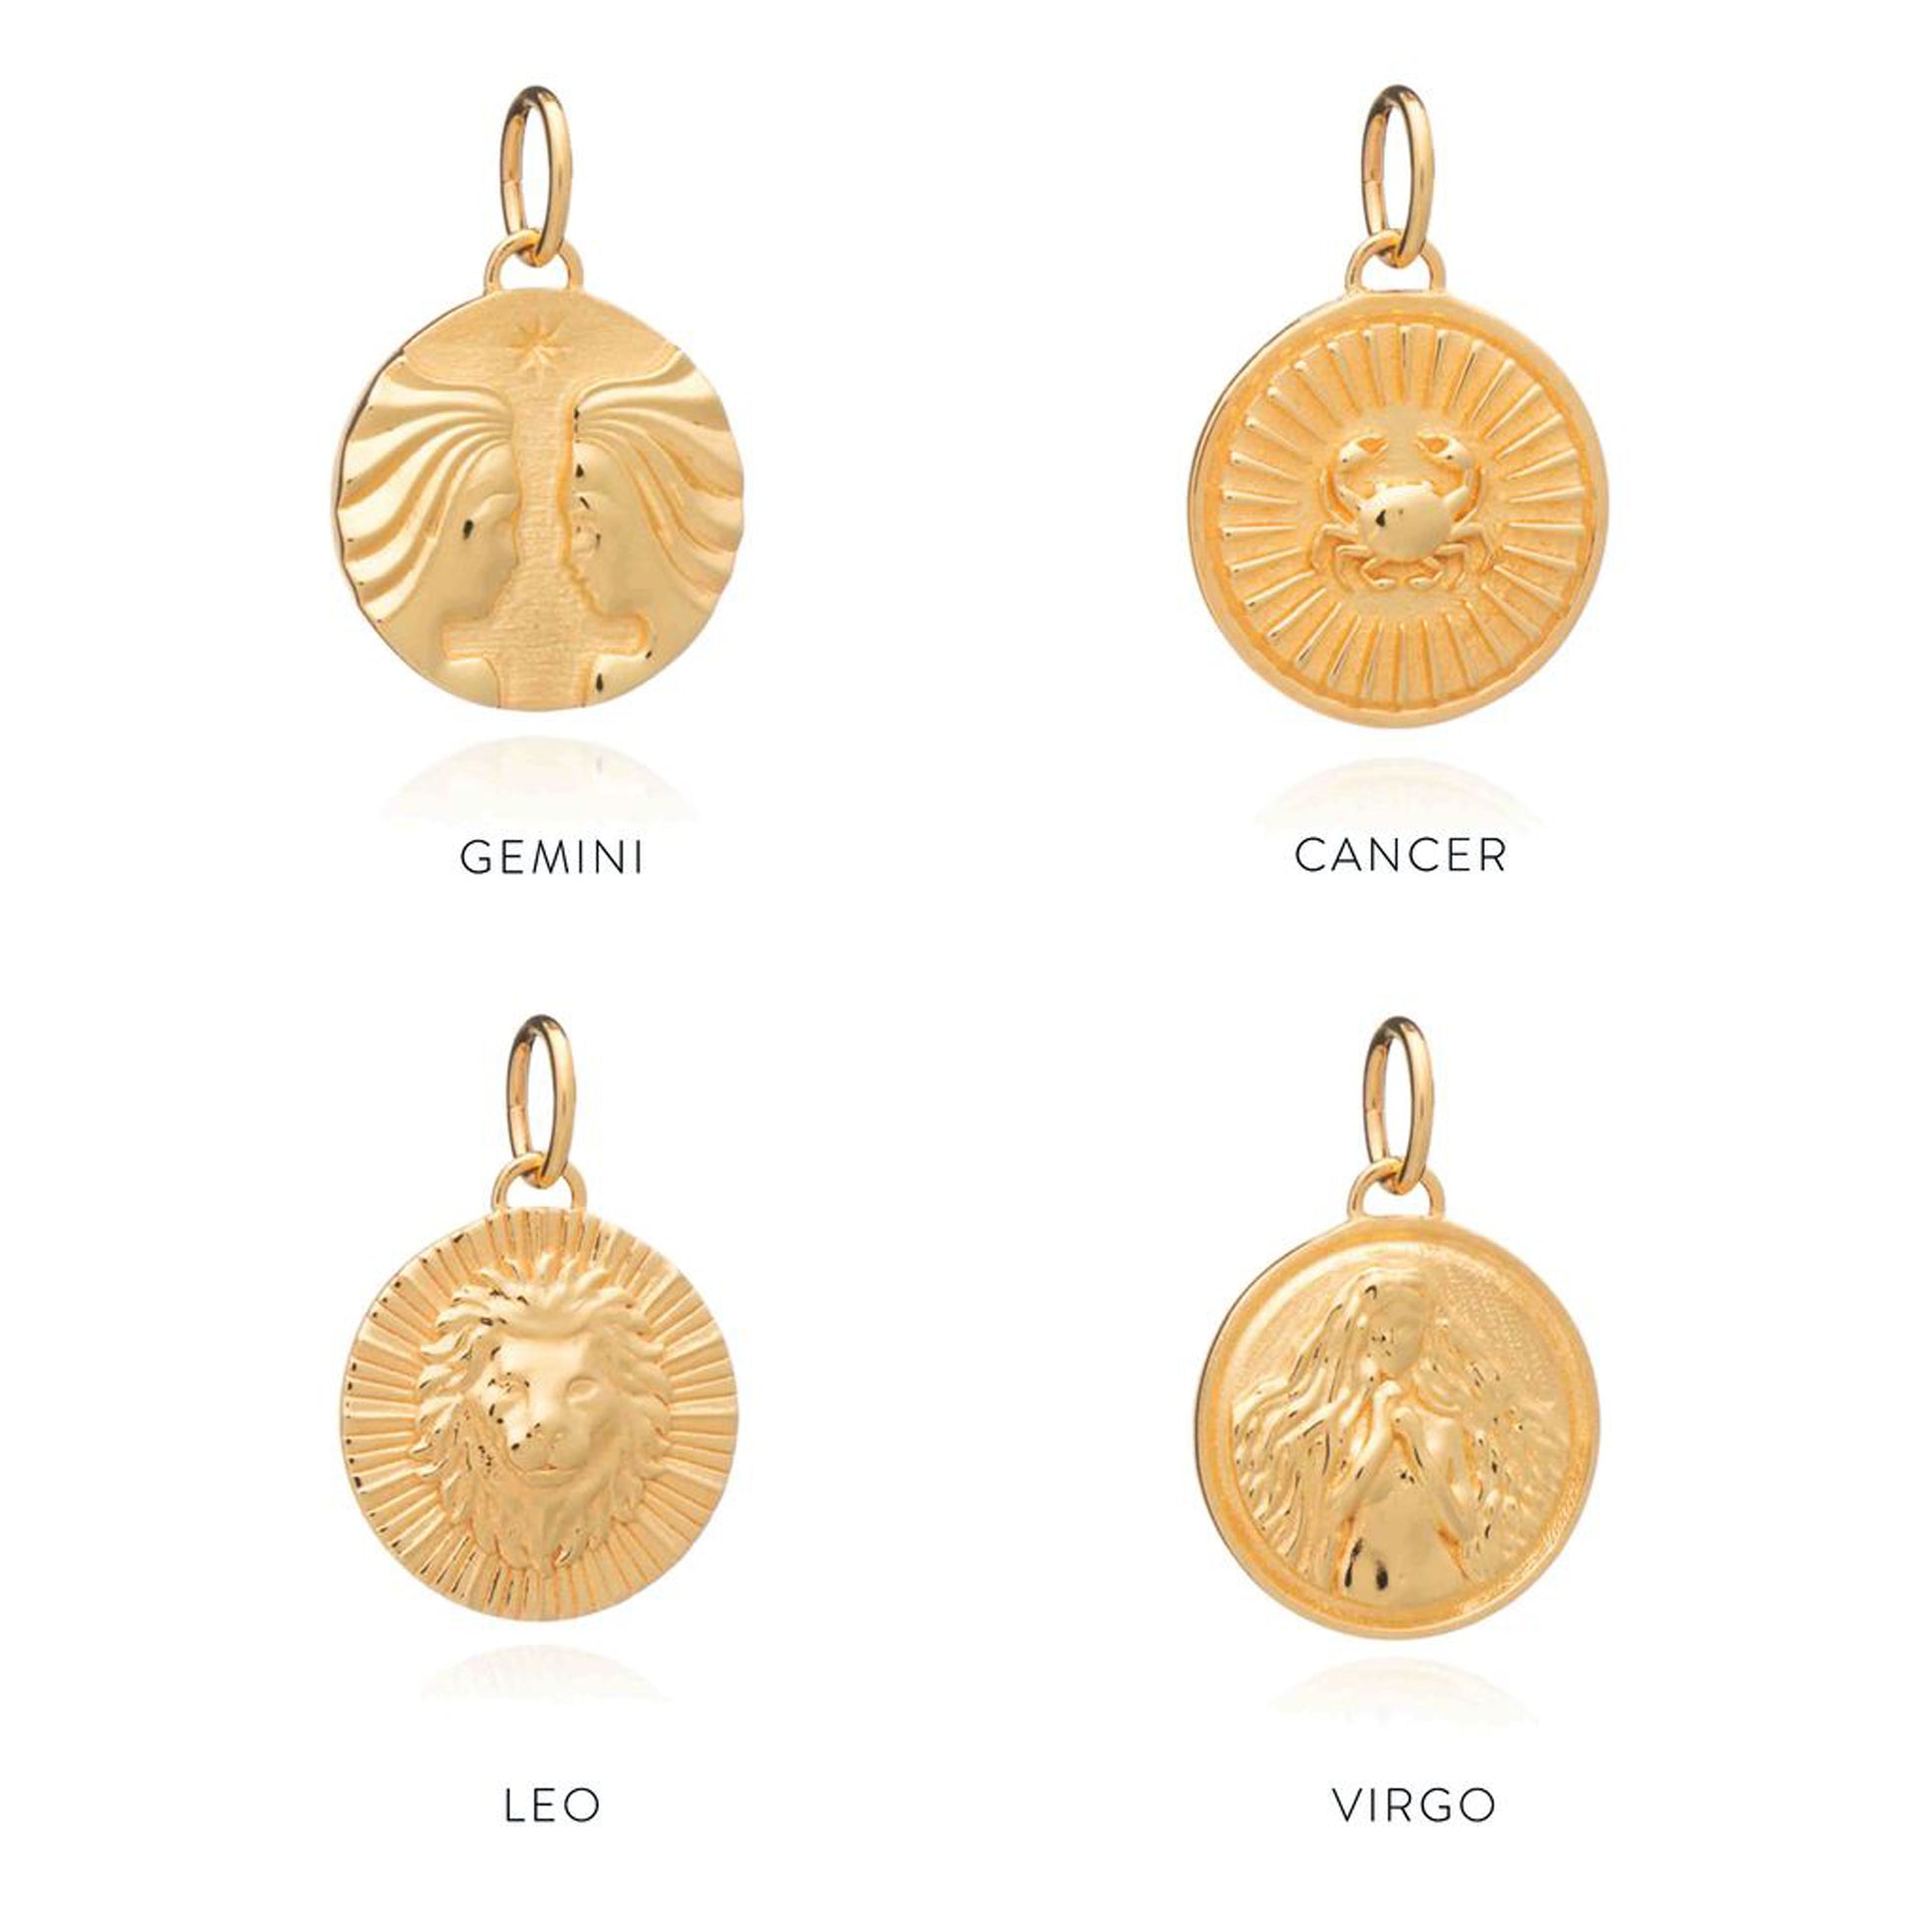 Introducing the Rachel Jackson London Zodiac Collection featuring a stunning Zodiac Art Coin Necklace - Gold pendant inspired by the intricate details of the Zodiac Chart.